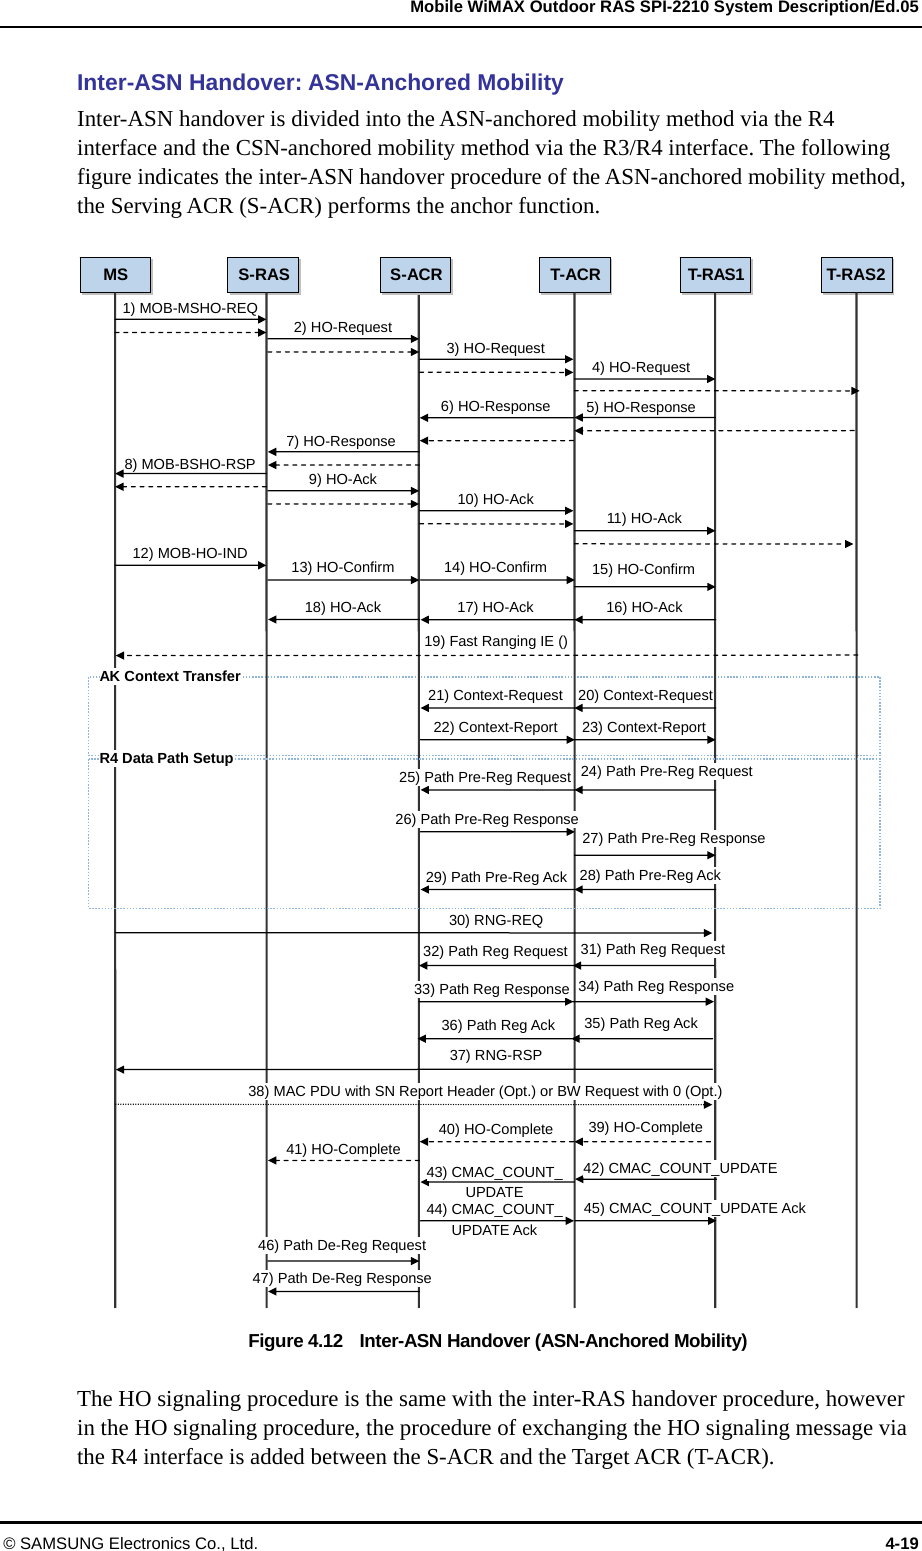   Mobile WiMAX Outdoor RAS SPI-2210 System Description/Ed.05 © SAMSUNG Electronics Co., Ltd.  4-19 Inter-ASN Handover: ASN-Anchored Mobility Inter-ASN handover is divided into the ASN-anchored mobility method via the R4 interface and the CSN-anchored mobility method via the R3/R4 interface. The following figure indicates the inter-ASN handover procedure of the ASN-anchored mobility method, the Serving ACR (S-ACR) performs the anchor function.  Figure 4.12    Inter-ASN Handover (ASN-Anchored Mobility)  The HO signaling procedure is the same with the inter-RAS handover procedure, however in the HO signaling procedure, the procedure of exchanging the HO signaling message via the R4 interface is added between the S-ACR and the Target ACR (T-ACR).   35) Path Reg Ack MS  S-RAS  T-ACR T-RAS1  T-RAS21) MOB-MSHO-REQ S-ACRAK Context Transfer 2) HO-Request 3) HO-Request 4) HO-Request 5) HO-Response6) HO-Response7) HO-Response8) MOB-BSHO-RSP  9) HO-Ack 10) HO-Ack 11) HO-Ack 12) MOB-HO-IND  13) HO-Confirm  14) HO-Confirm  15) HO-Confirm21) Context-Request 20) Context-Request 22) Context-Report 23) Context-Report 17) HO-Ack  16) HO-Ack 18) HO-Ack R4 Data Path Setup 25) Path Pre-Reg Request26) Path Pre-Reg Response29) Path Pre-Reg Ack 28) Path Pre-Reg Ack 19) Fast Ranging IE ()30) RNG-REQ 37) RNG-RSP 38) MAC PDU with SN Report Header (Opt.) or BW Request with 0 (Opt.) 40) HO-Complete  39) HO-Complete 41) HO-Complete 46) Path De-Reg Request47) Path De-Reg Response42) CMAC_COUNT_UPDATE 45) CMAC_COUNT_UPDATE Ack 43) CMAC_COUNT_UPDATE 44) CMAC_COUNT_UPDATE Ack 32) Path Reg Request36) Path Reg Ack 24) Path Pre-Reg Request 27) Path Pre-Reg Response 34) Path Reg Response 31) Path Reg Request 33) Path Reg Response 